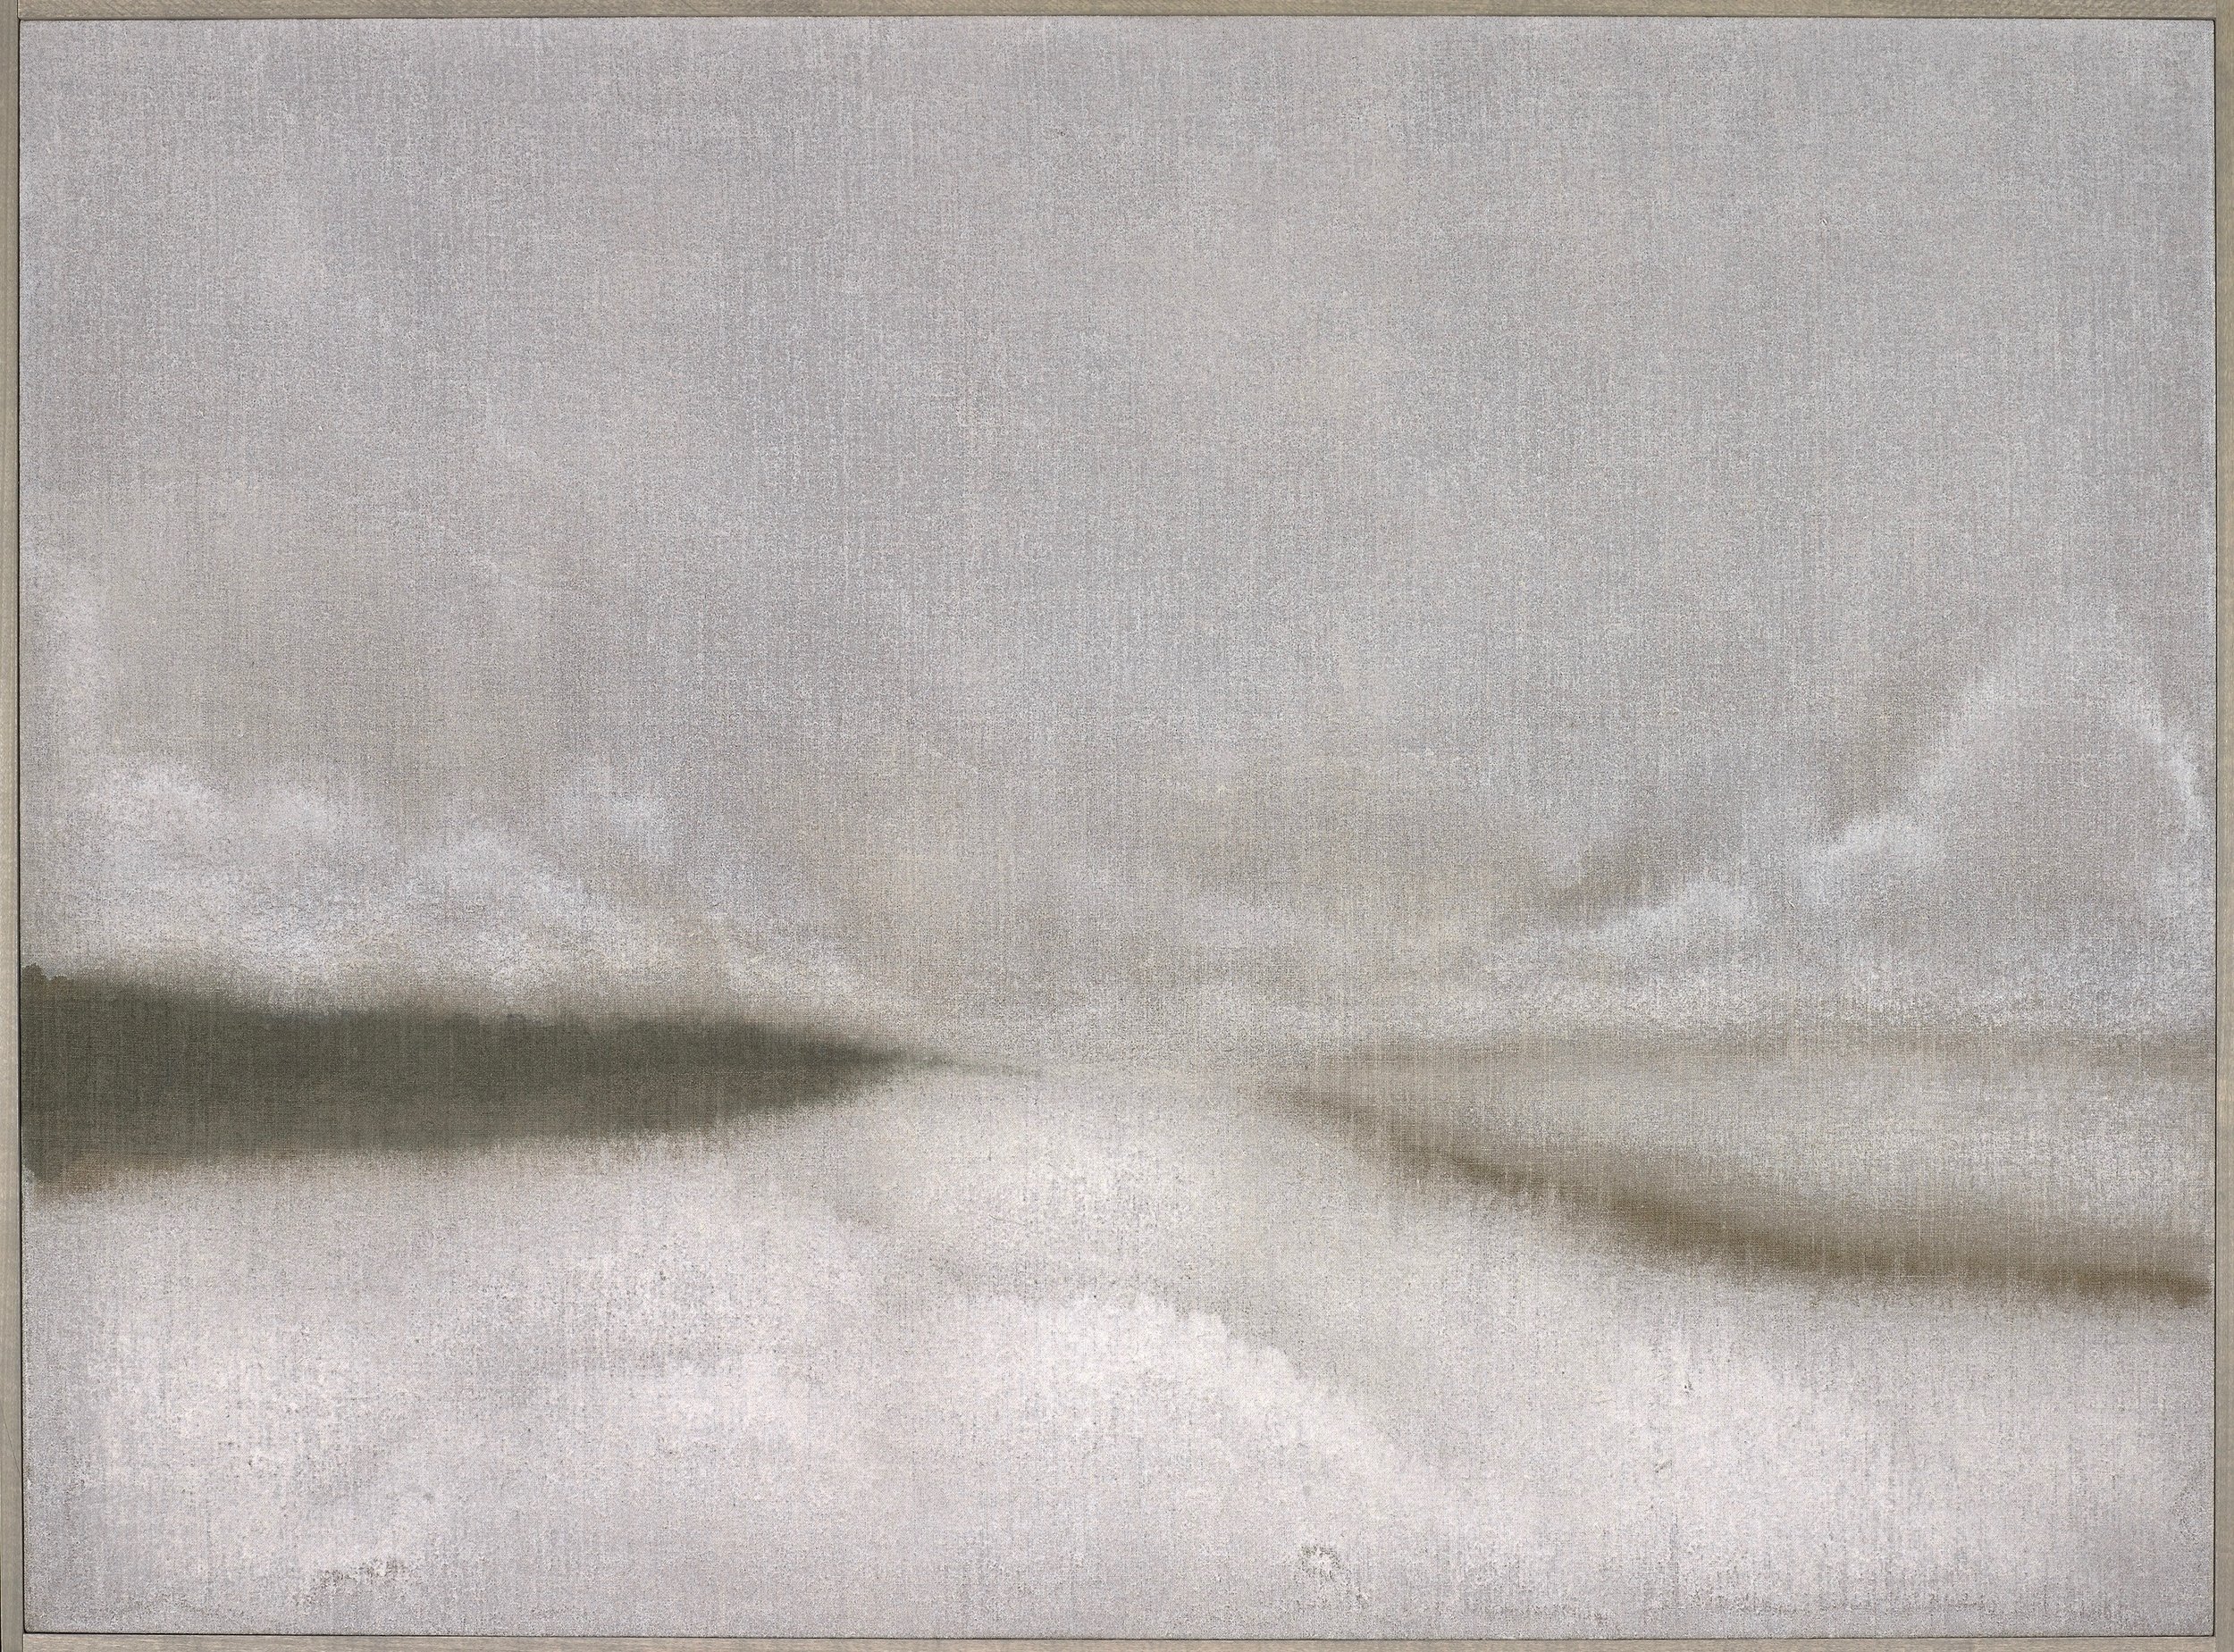  White Main Beach, 2012. Oil on Linen, 37.5 x 51.5 inches. Guild Hall Museum Permanent Collection. East Hampton, NY. 